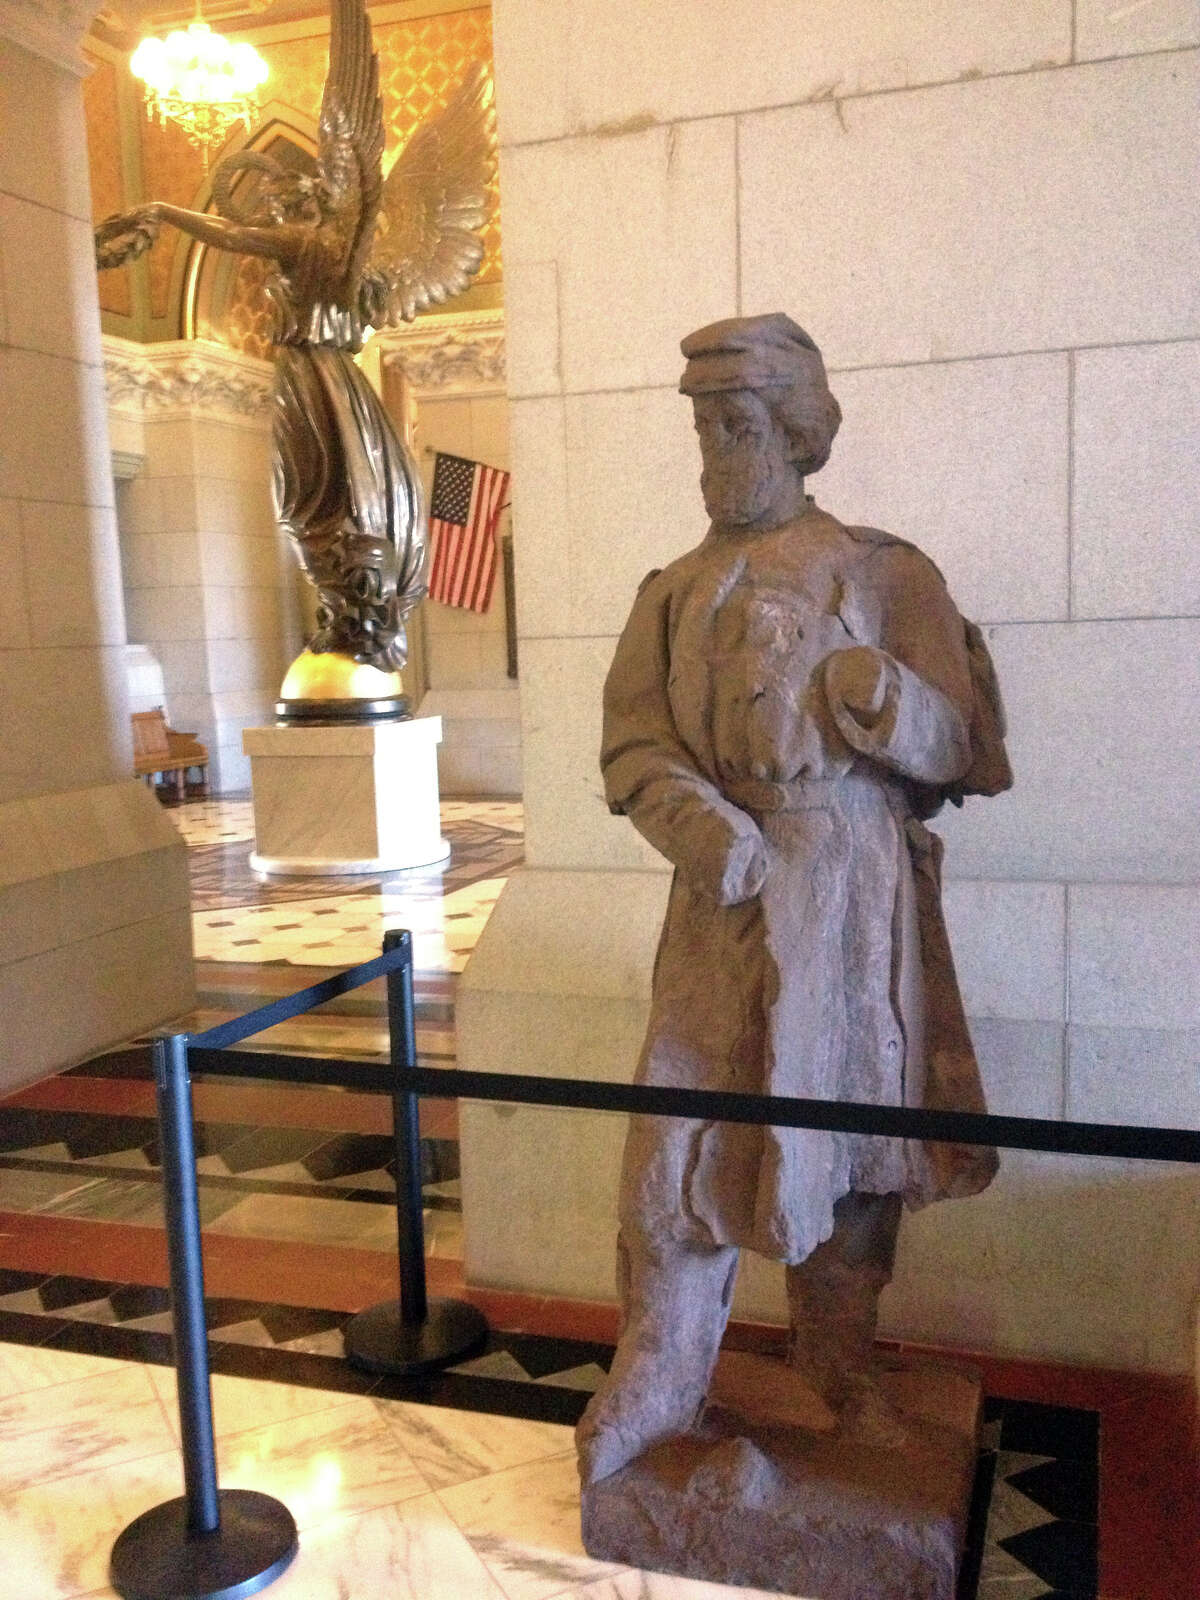 A crumbling civil war statue is being installed at the Capitol in Hartford.